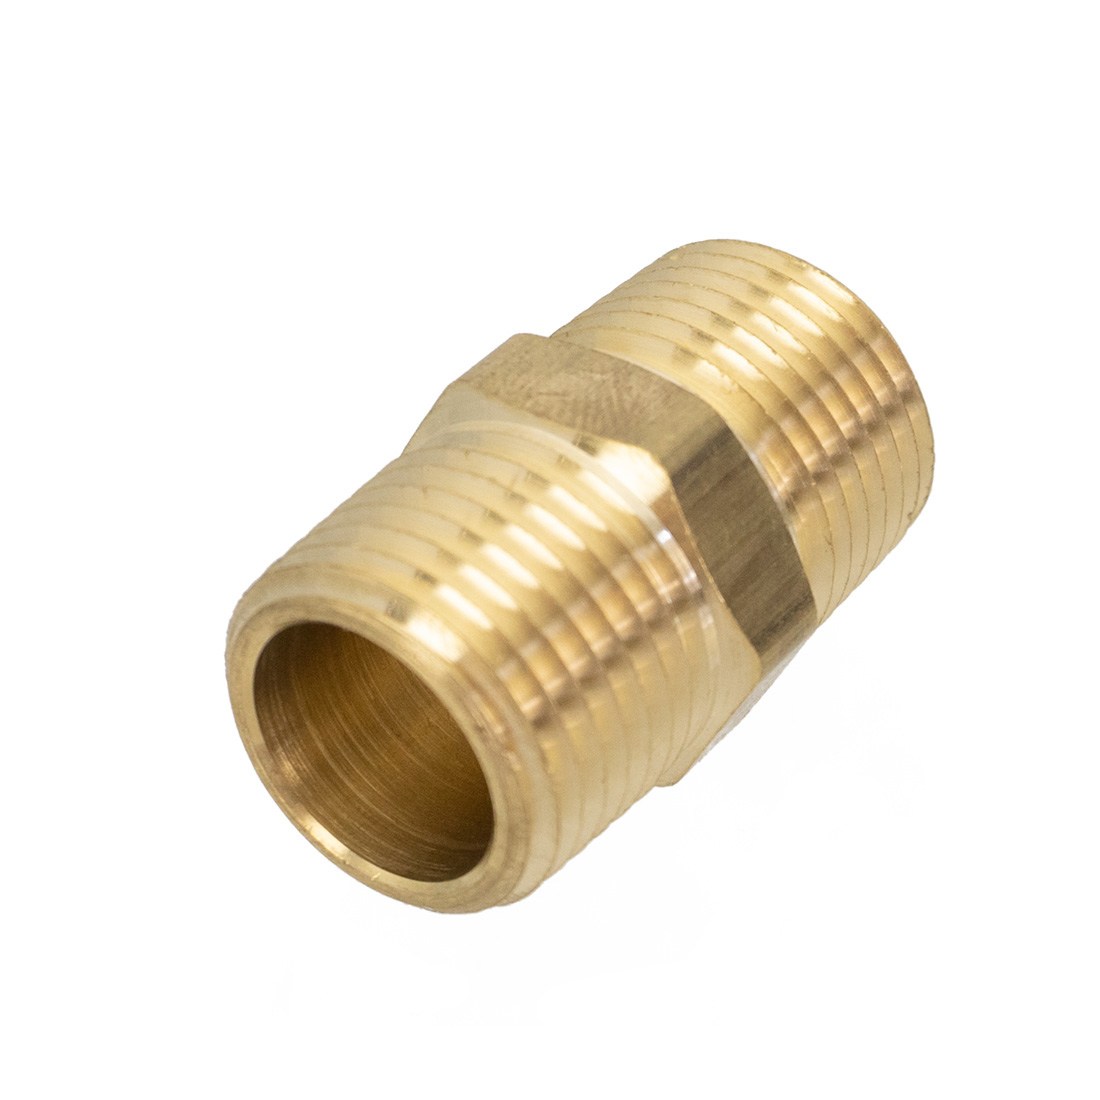 PWP Brass Fitting - Hex Nipple 1/2 NPT Angle View